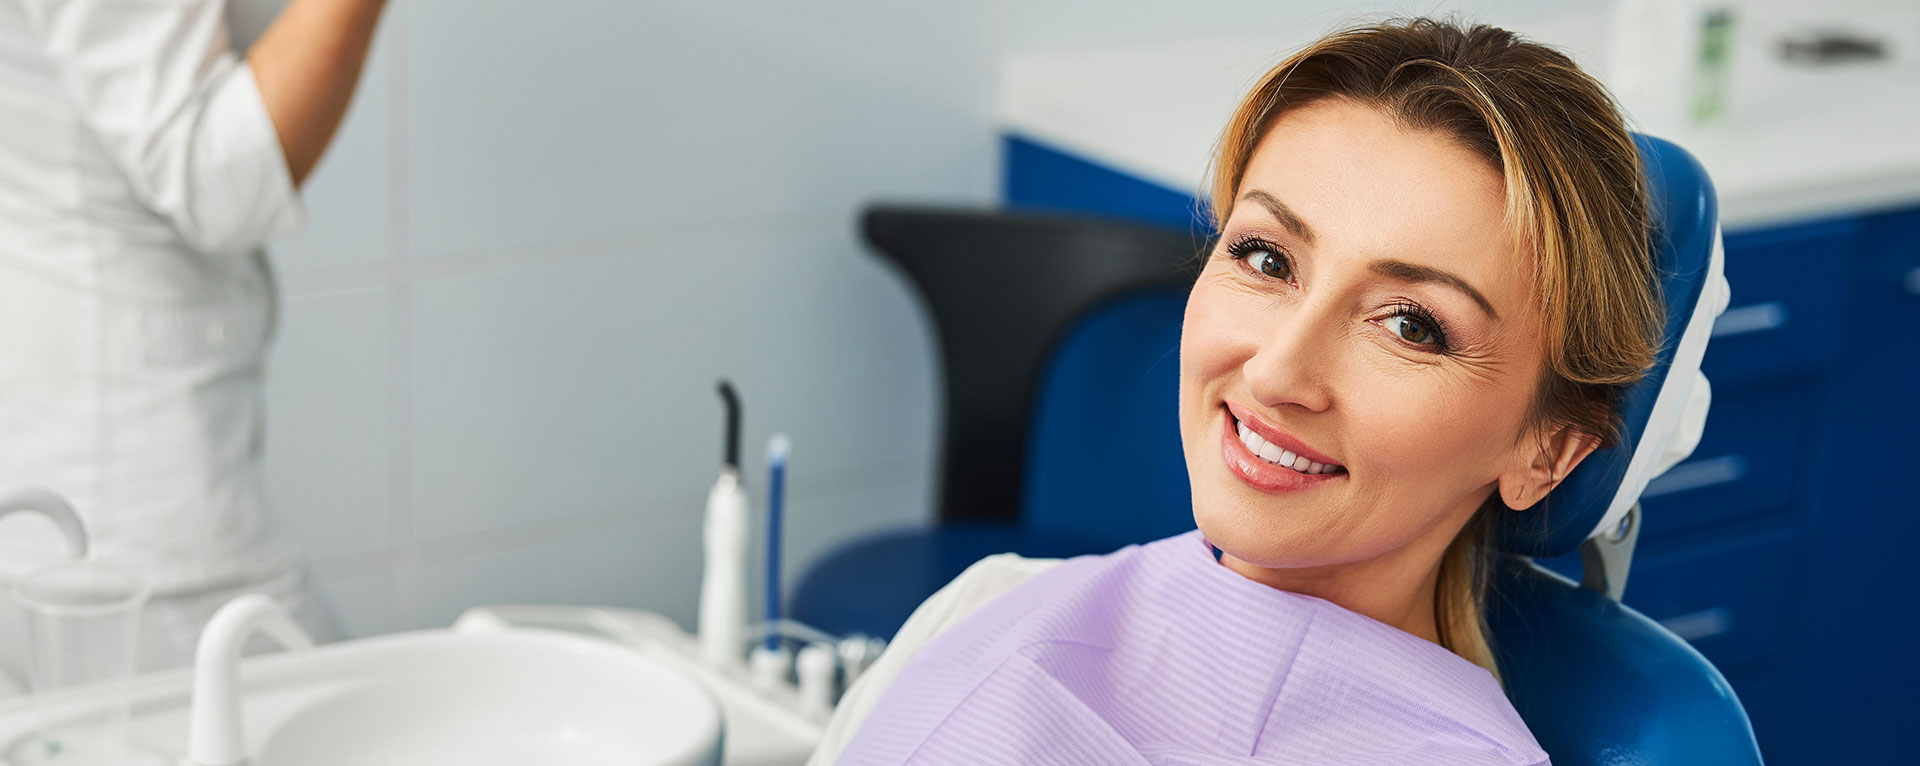 The image shows a woman in a dental office, smiling and looking directly at the camera. She is seated in a dental chair with a dental hygienist standing behind her, both wearing face masks. They are surrounded by dental equipment and tools.